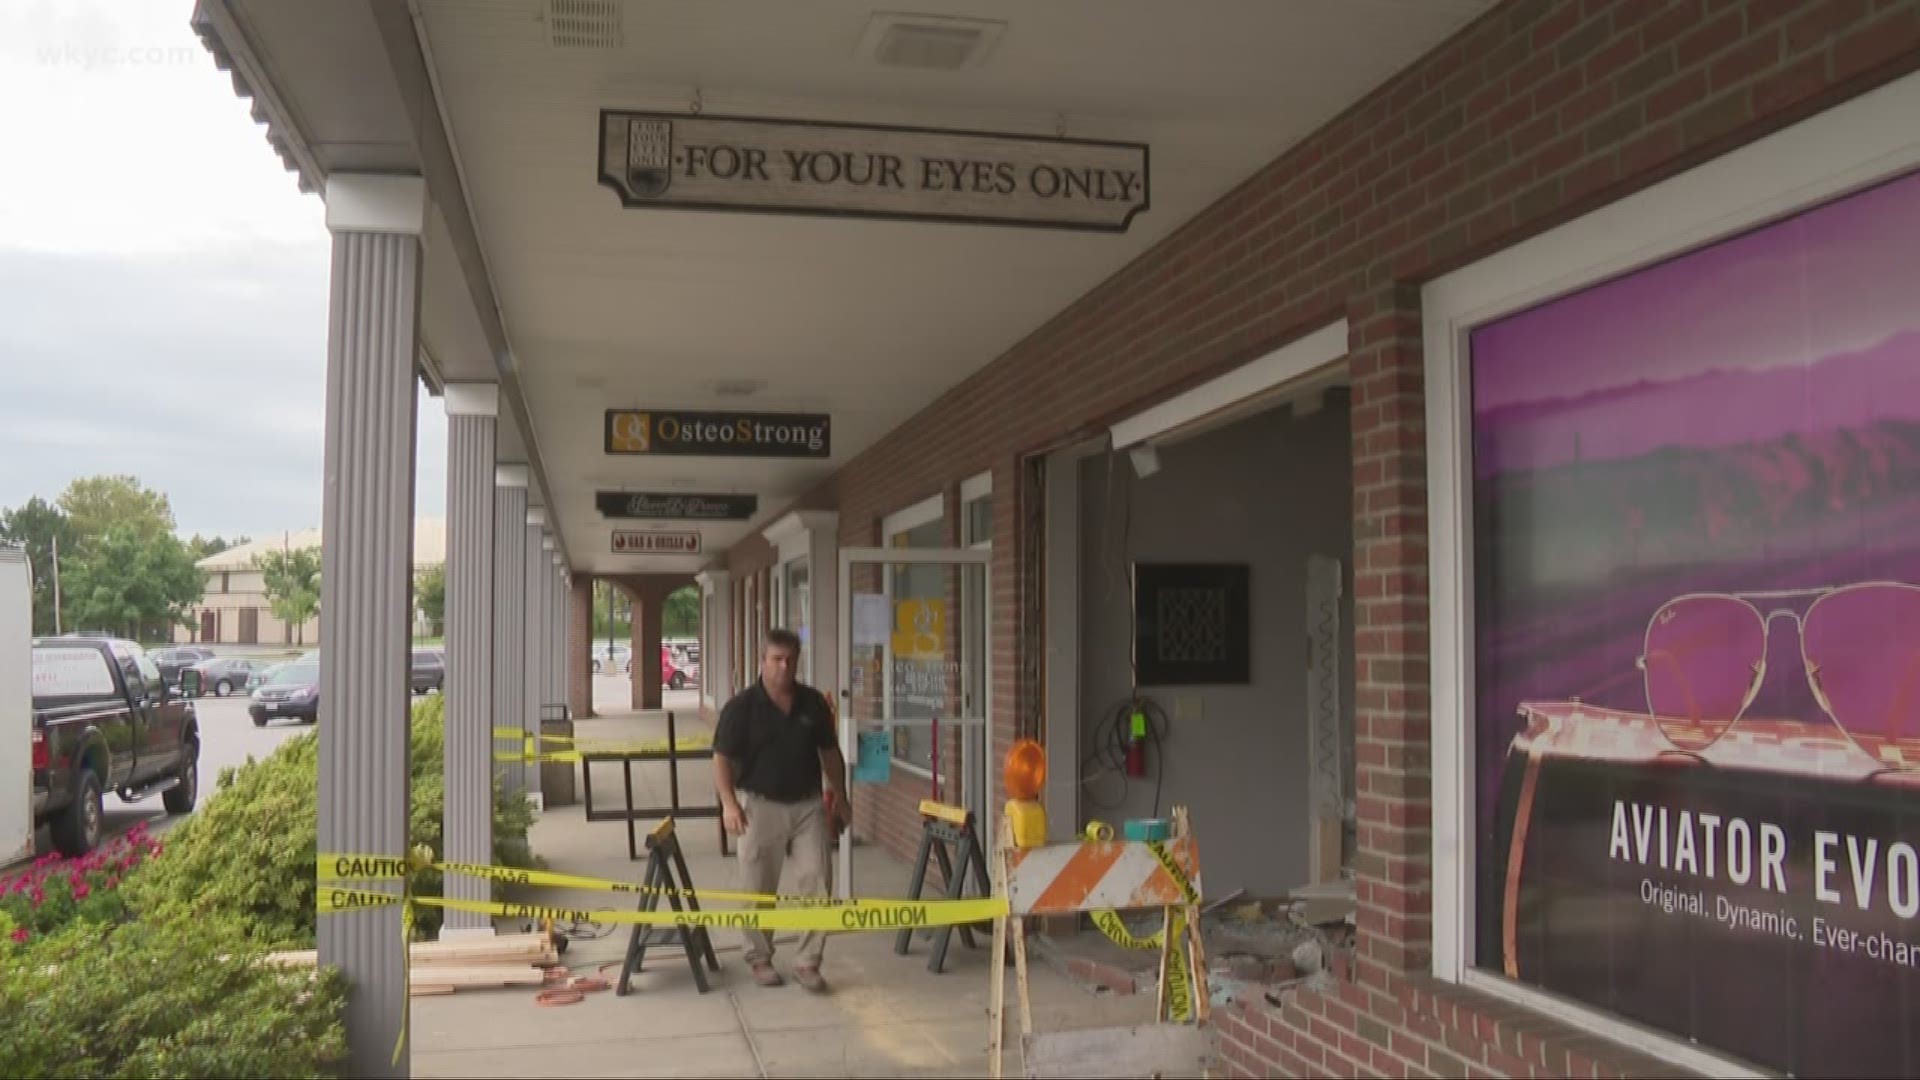 A Lake County eye clinic has been forced to temporarily close after a pickup truck slammed into its offices early Thursday morning.